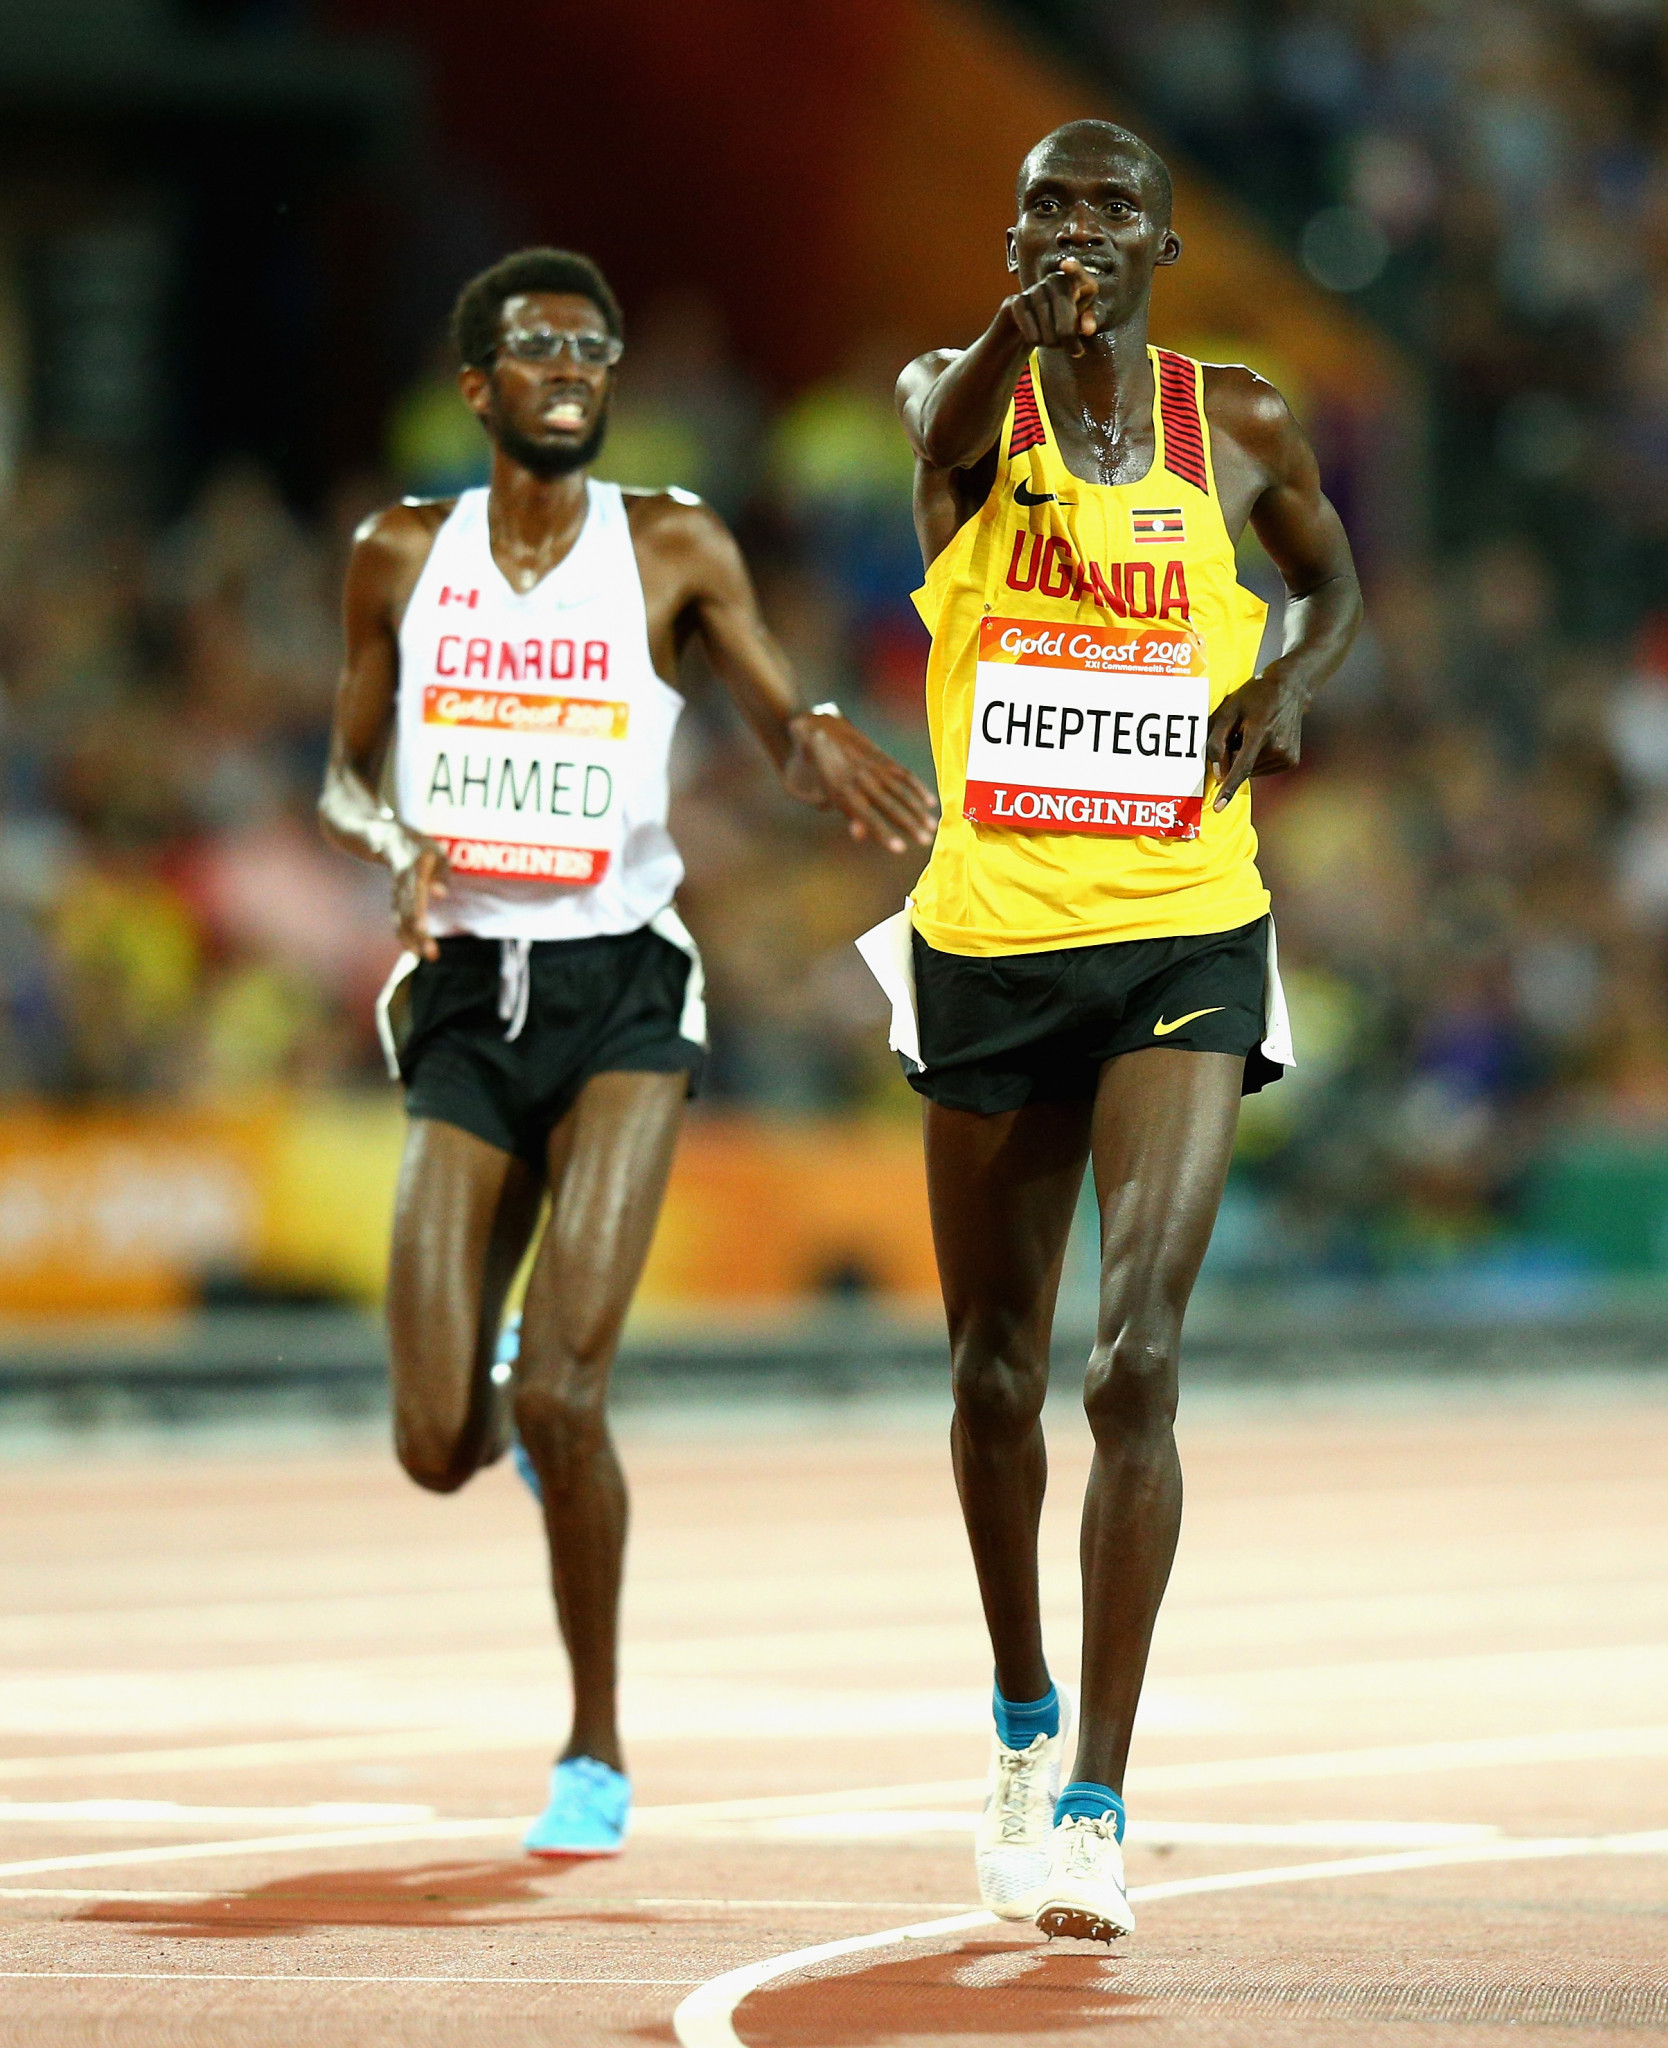 Joshua Kiprui Cheptegei won two of Uganda's three gold medals at Gold Coast 2018 with one of his victories coming in the men's 10,000m ©Getty Images